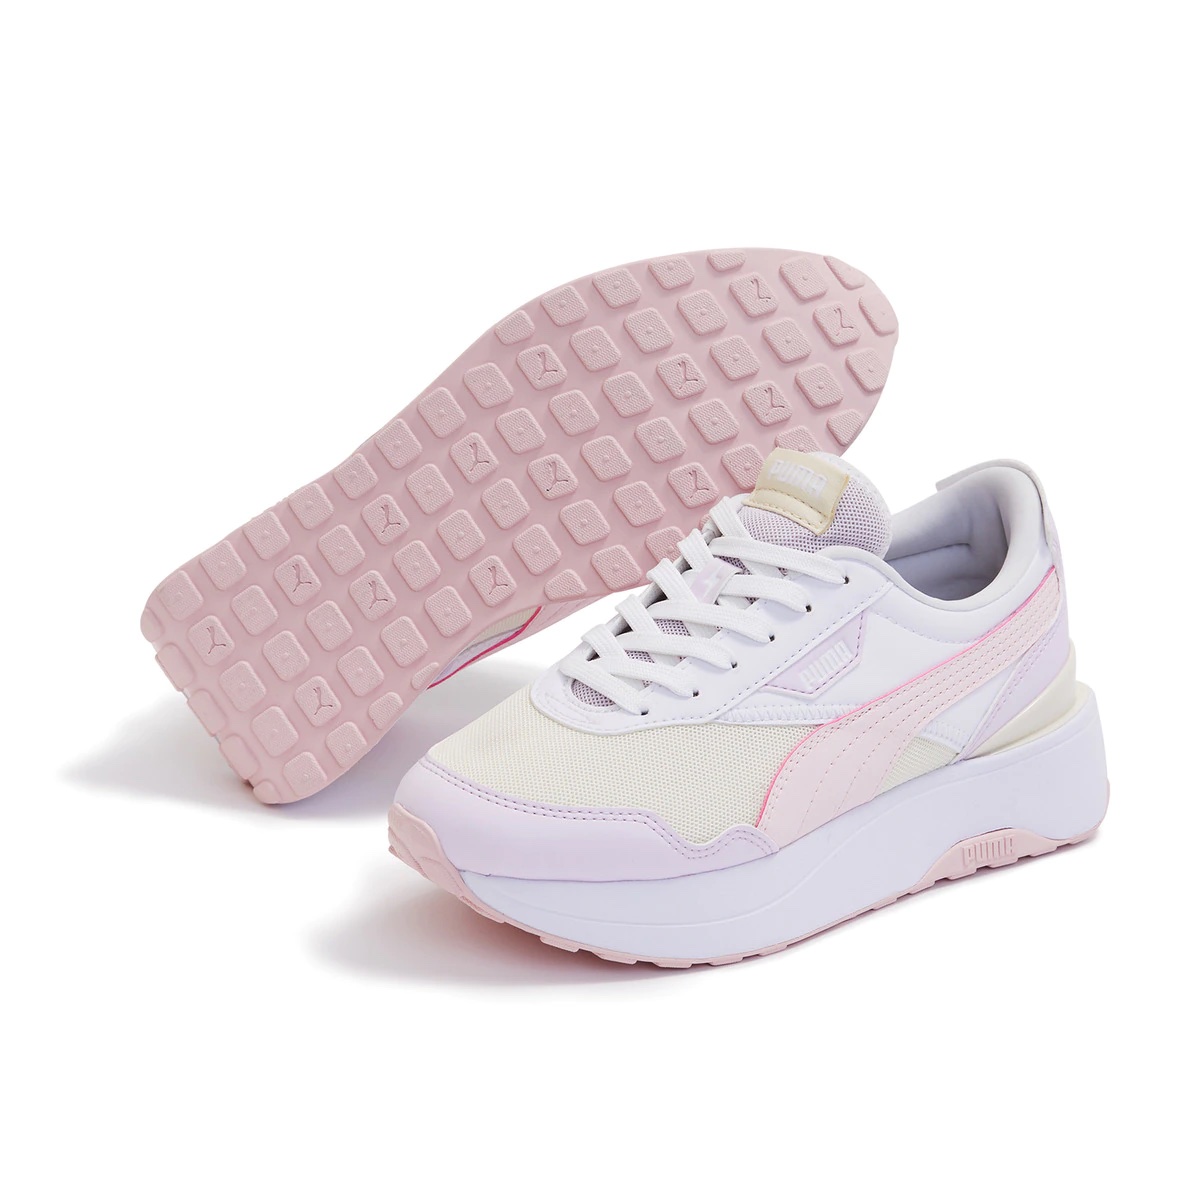 Baskets Cruise Rider By Pedroche Puma pour femme.